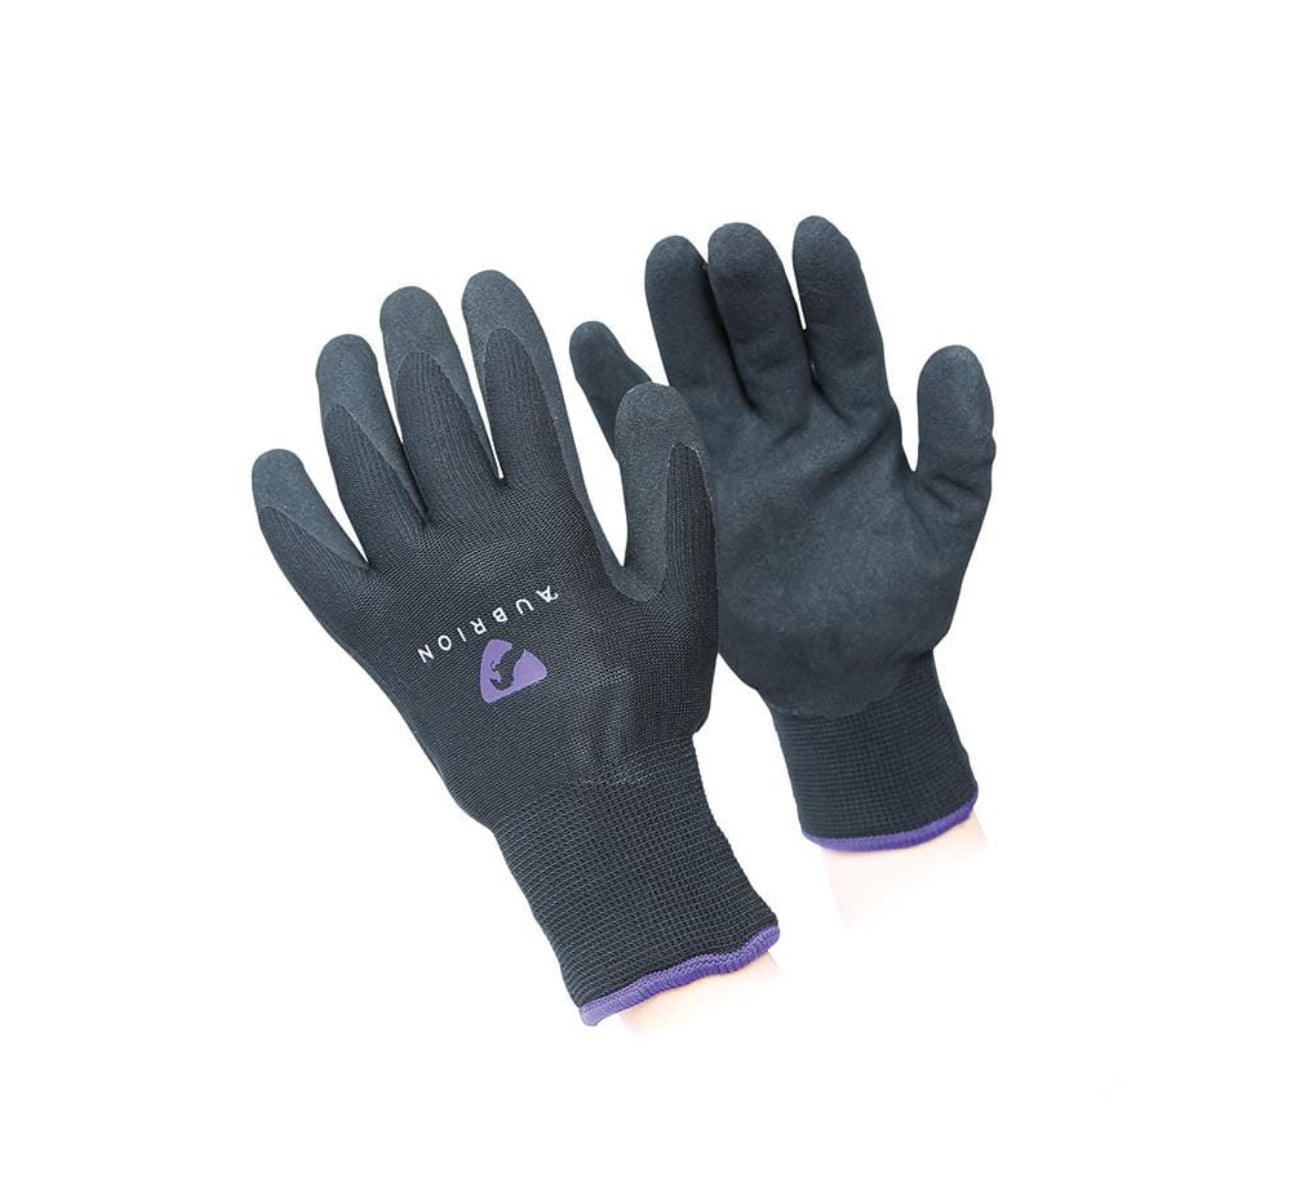 Shires All Purpose Winter Yard Work Gloves